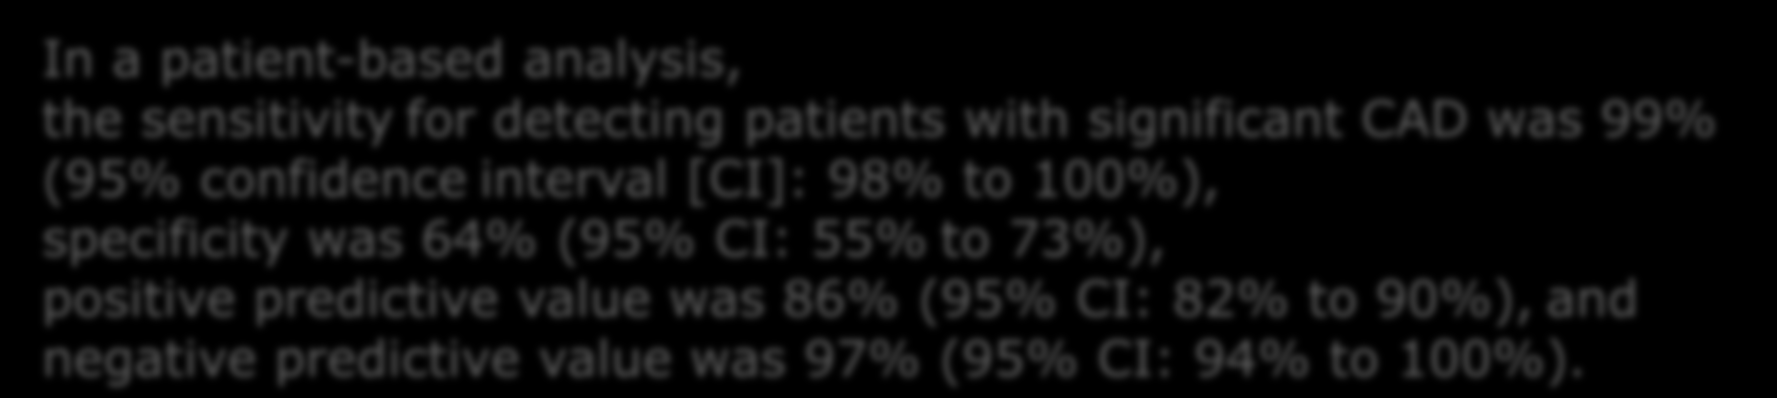 specificity was 64% (95% CI: 55% to 73%), positive predictive value was 86% (95% CI: 82% to 90%), and